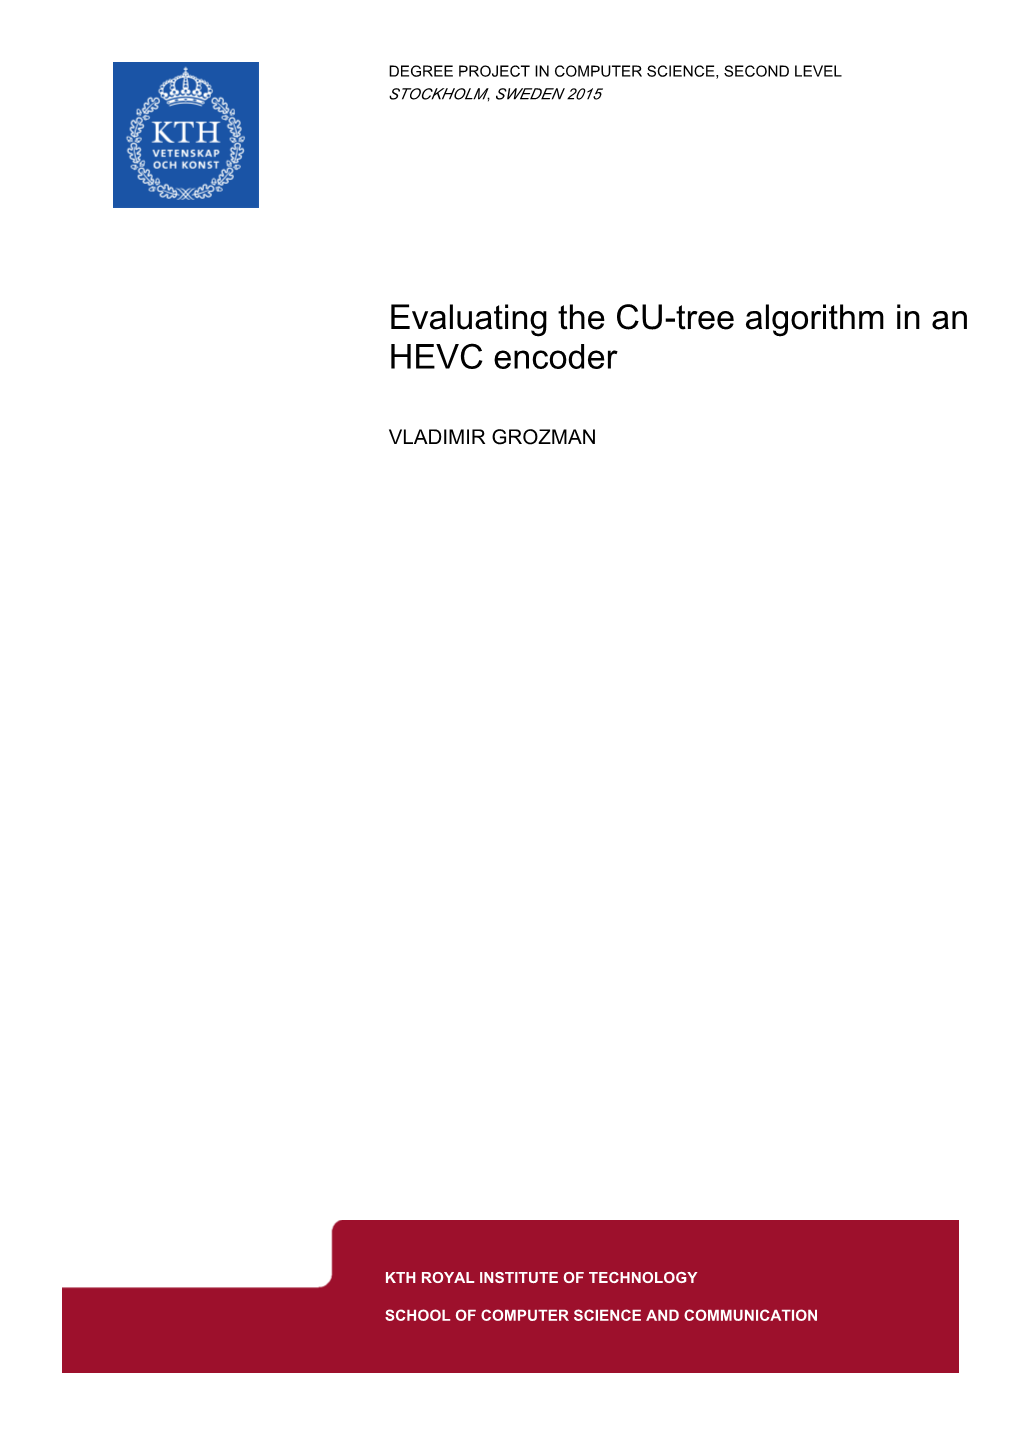 Evaluating the CU-Tree Algorithm in an HEVC Encoder